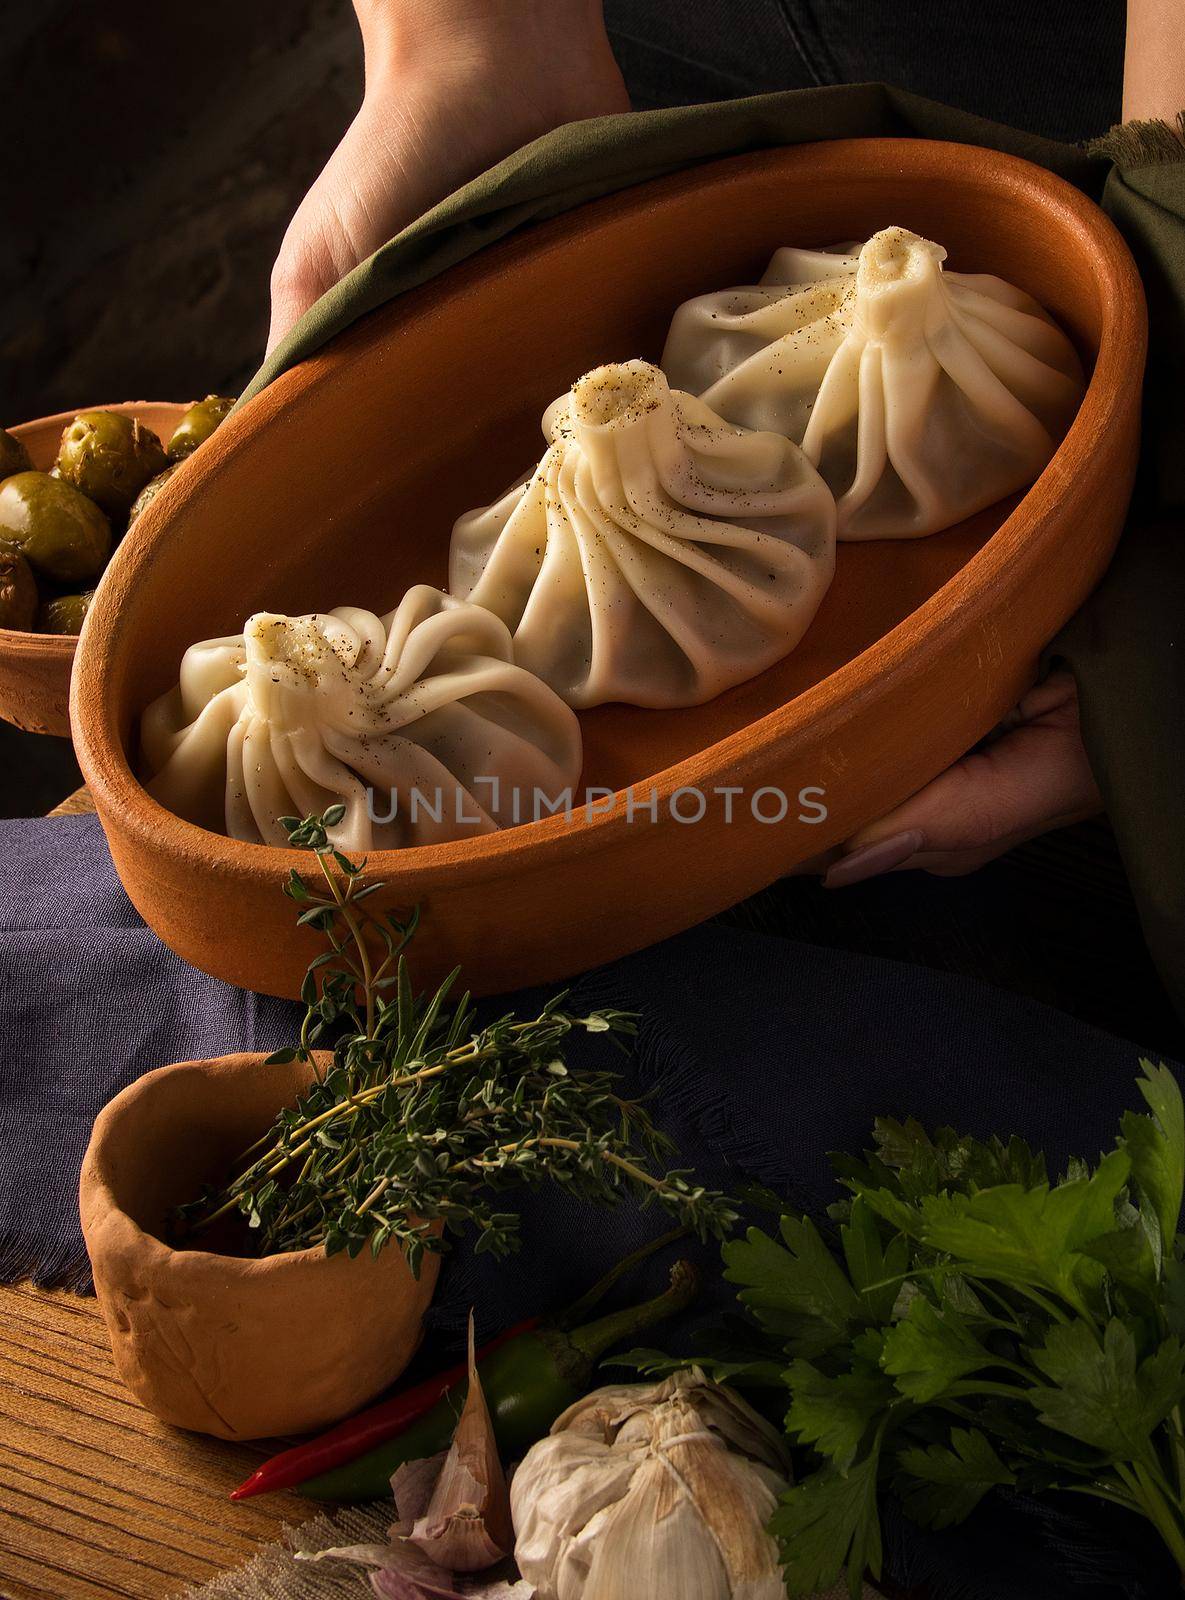 A vertical shot of a luxurious restaurant table with a gourmet khinkali dish